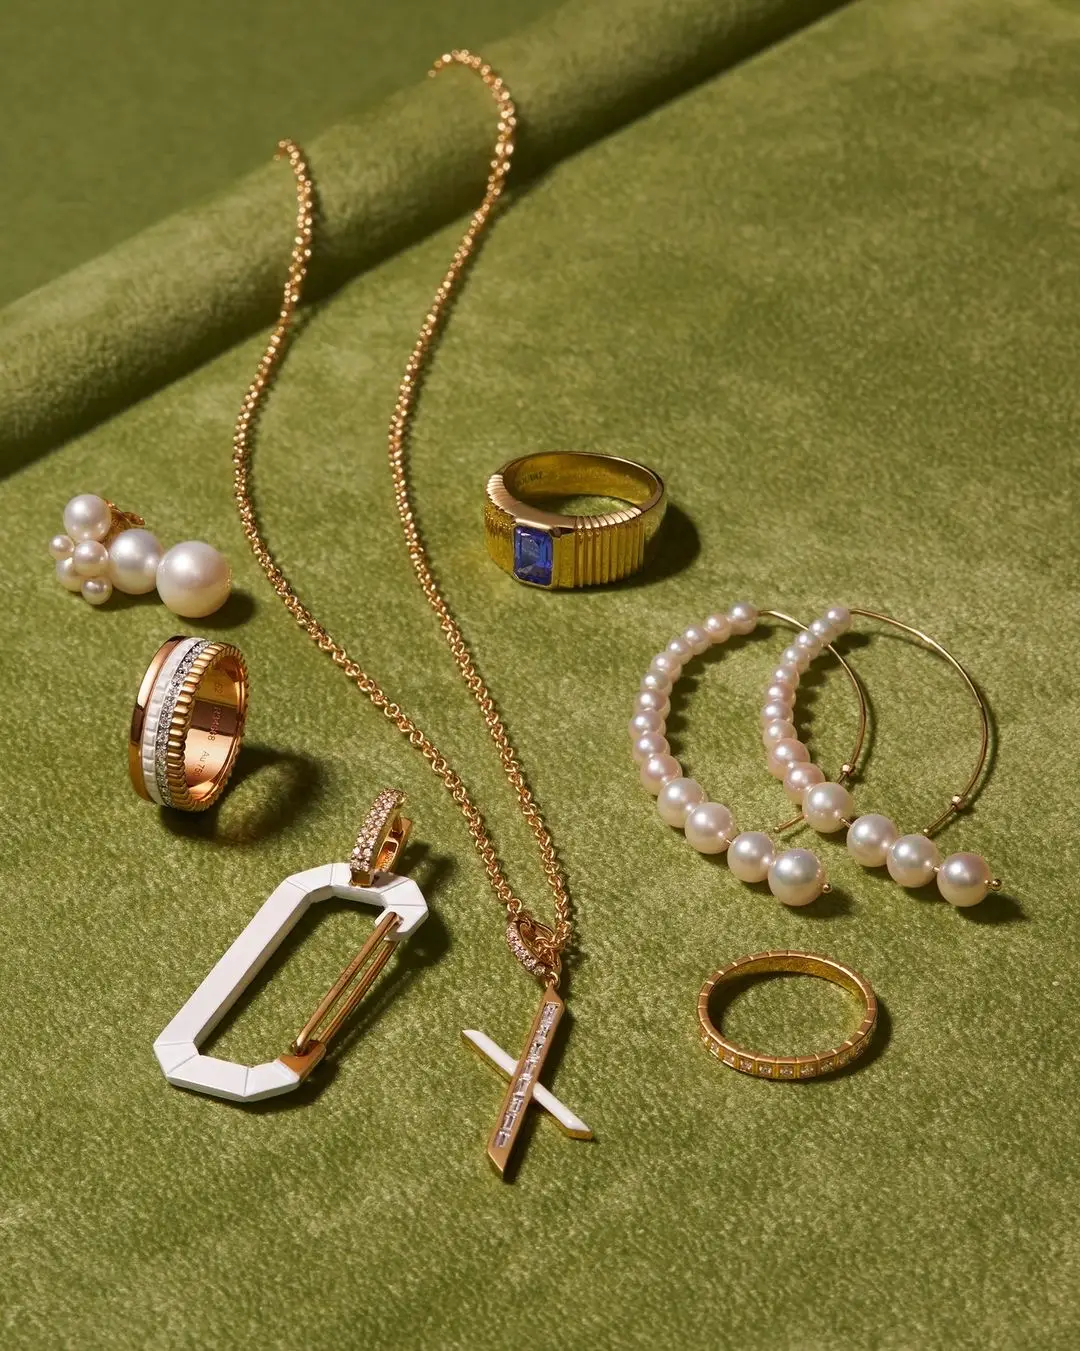 6 Excellent Tips on How to Care for Your Jewelry ...